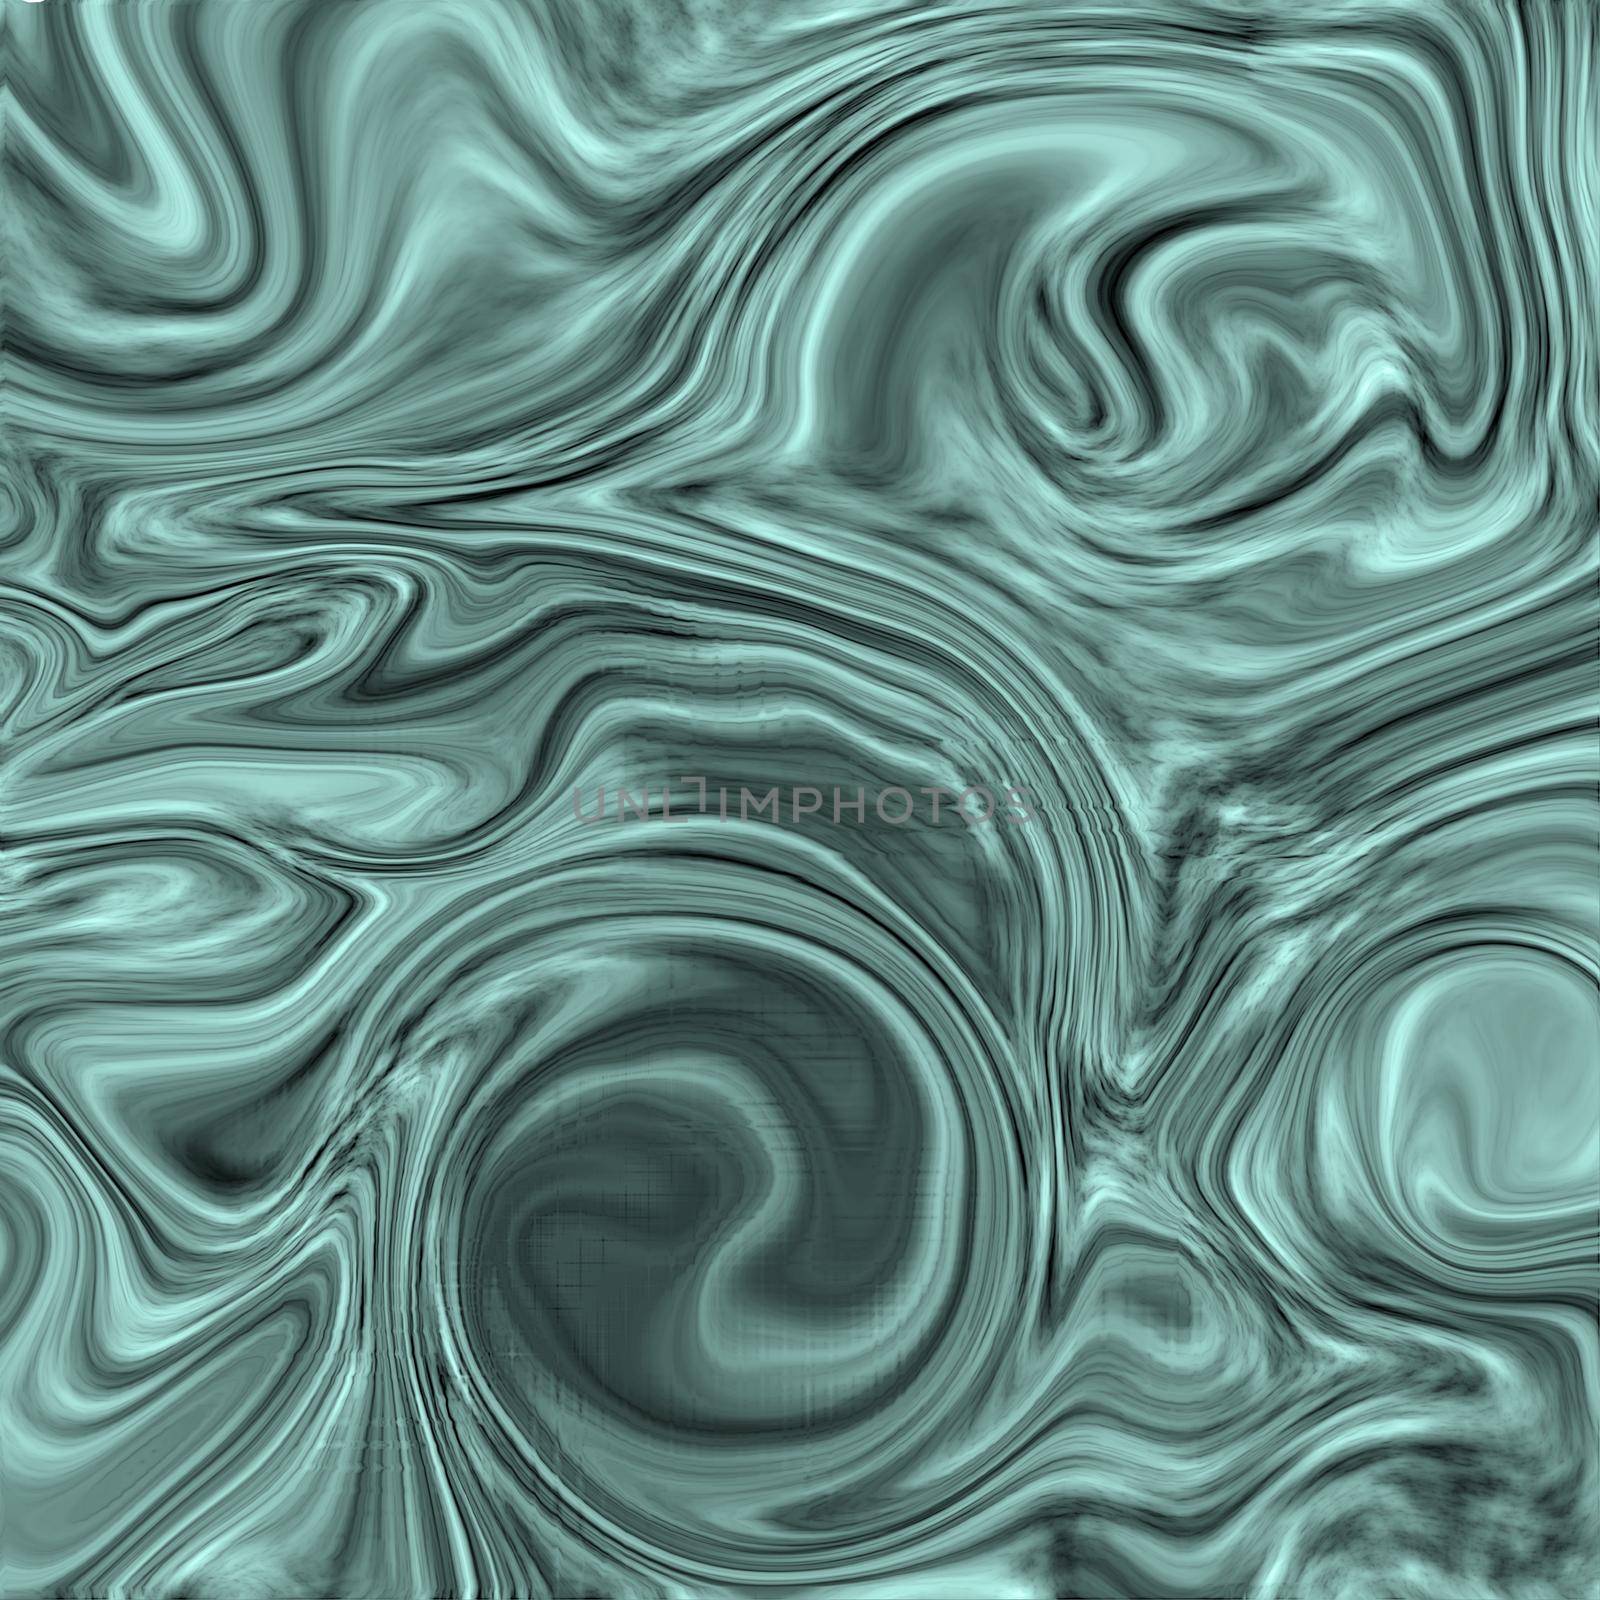 Silk abstract background in turquoise blue. Curved liquid sea waves, silk satin velvet texture background. Illustration